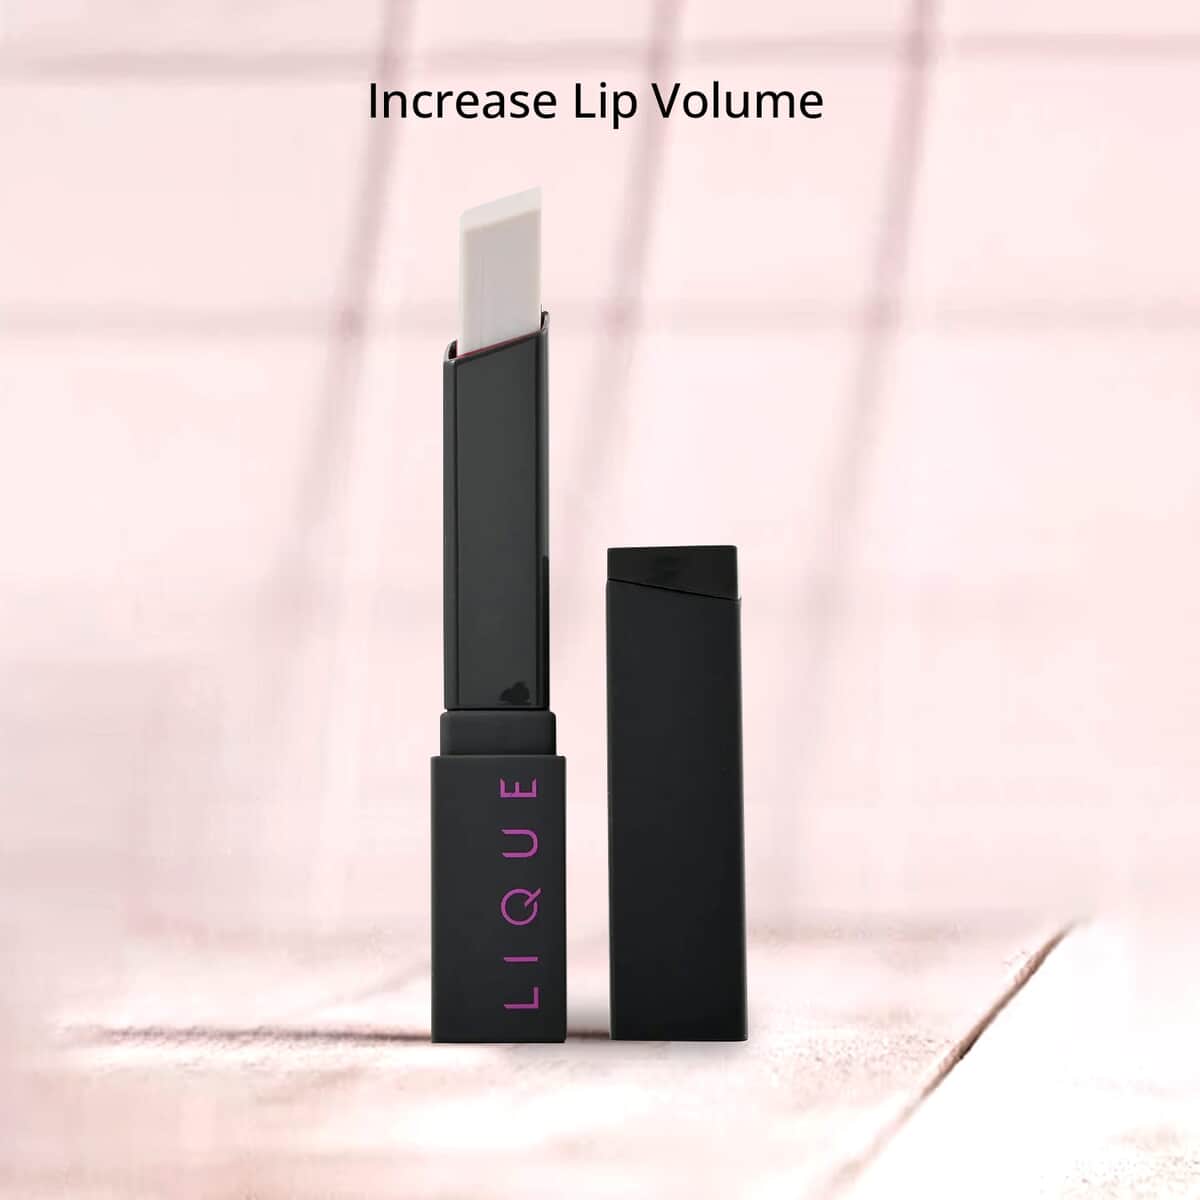 Closeout Lique Set of 2 (One Lipstick & One Effect Powder) with Free Set of 2 (One Lipstick & One Effect Powder) image number 1